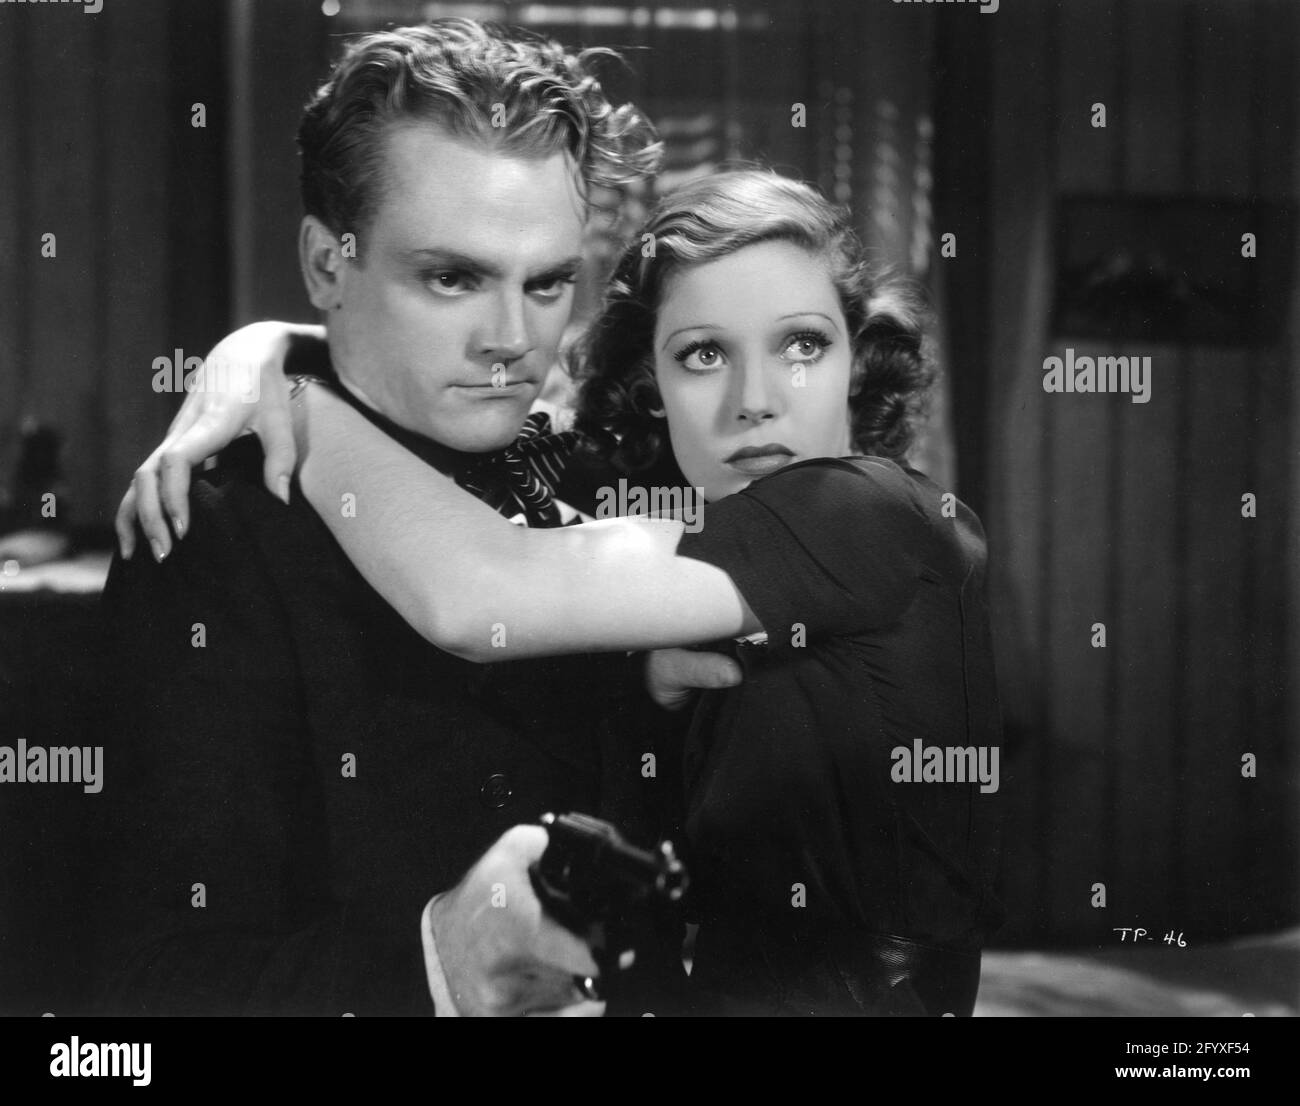 JAMES CAGNEY and LORETTA YOUNG in TAXI 1931 director ROY DEL RUTH based ...